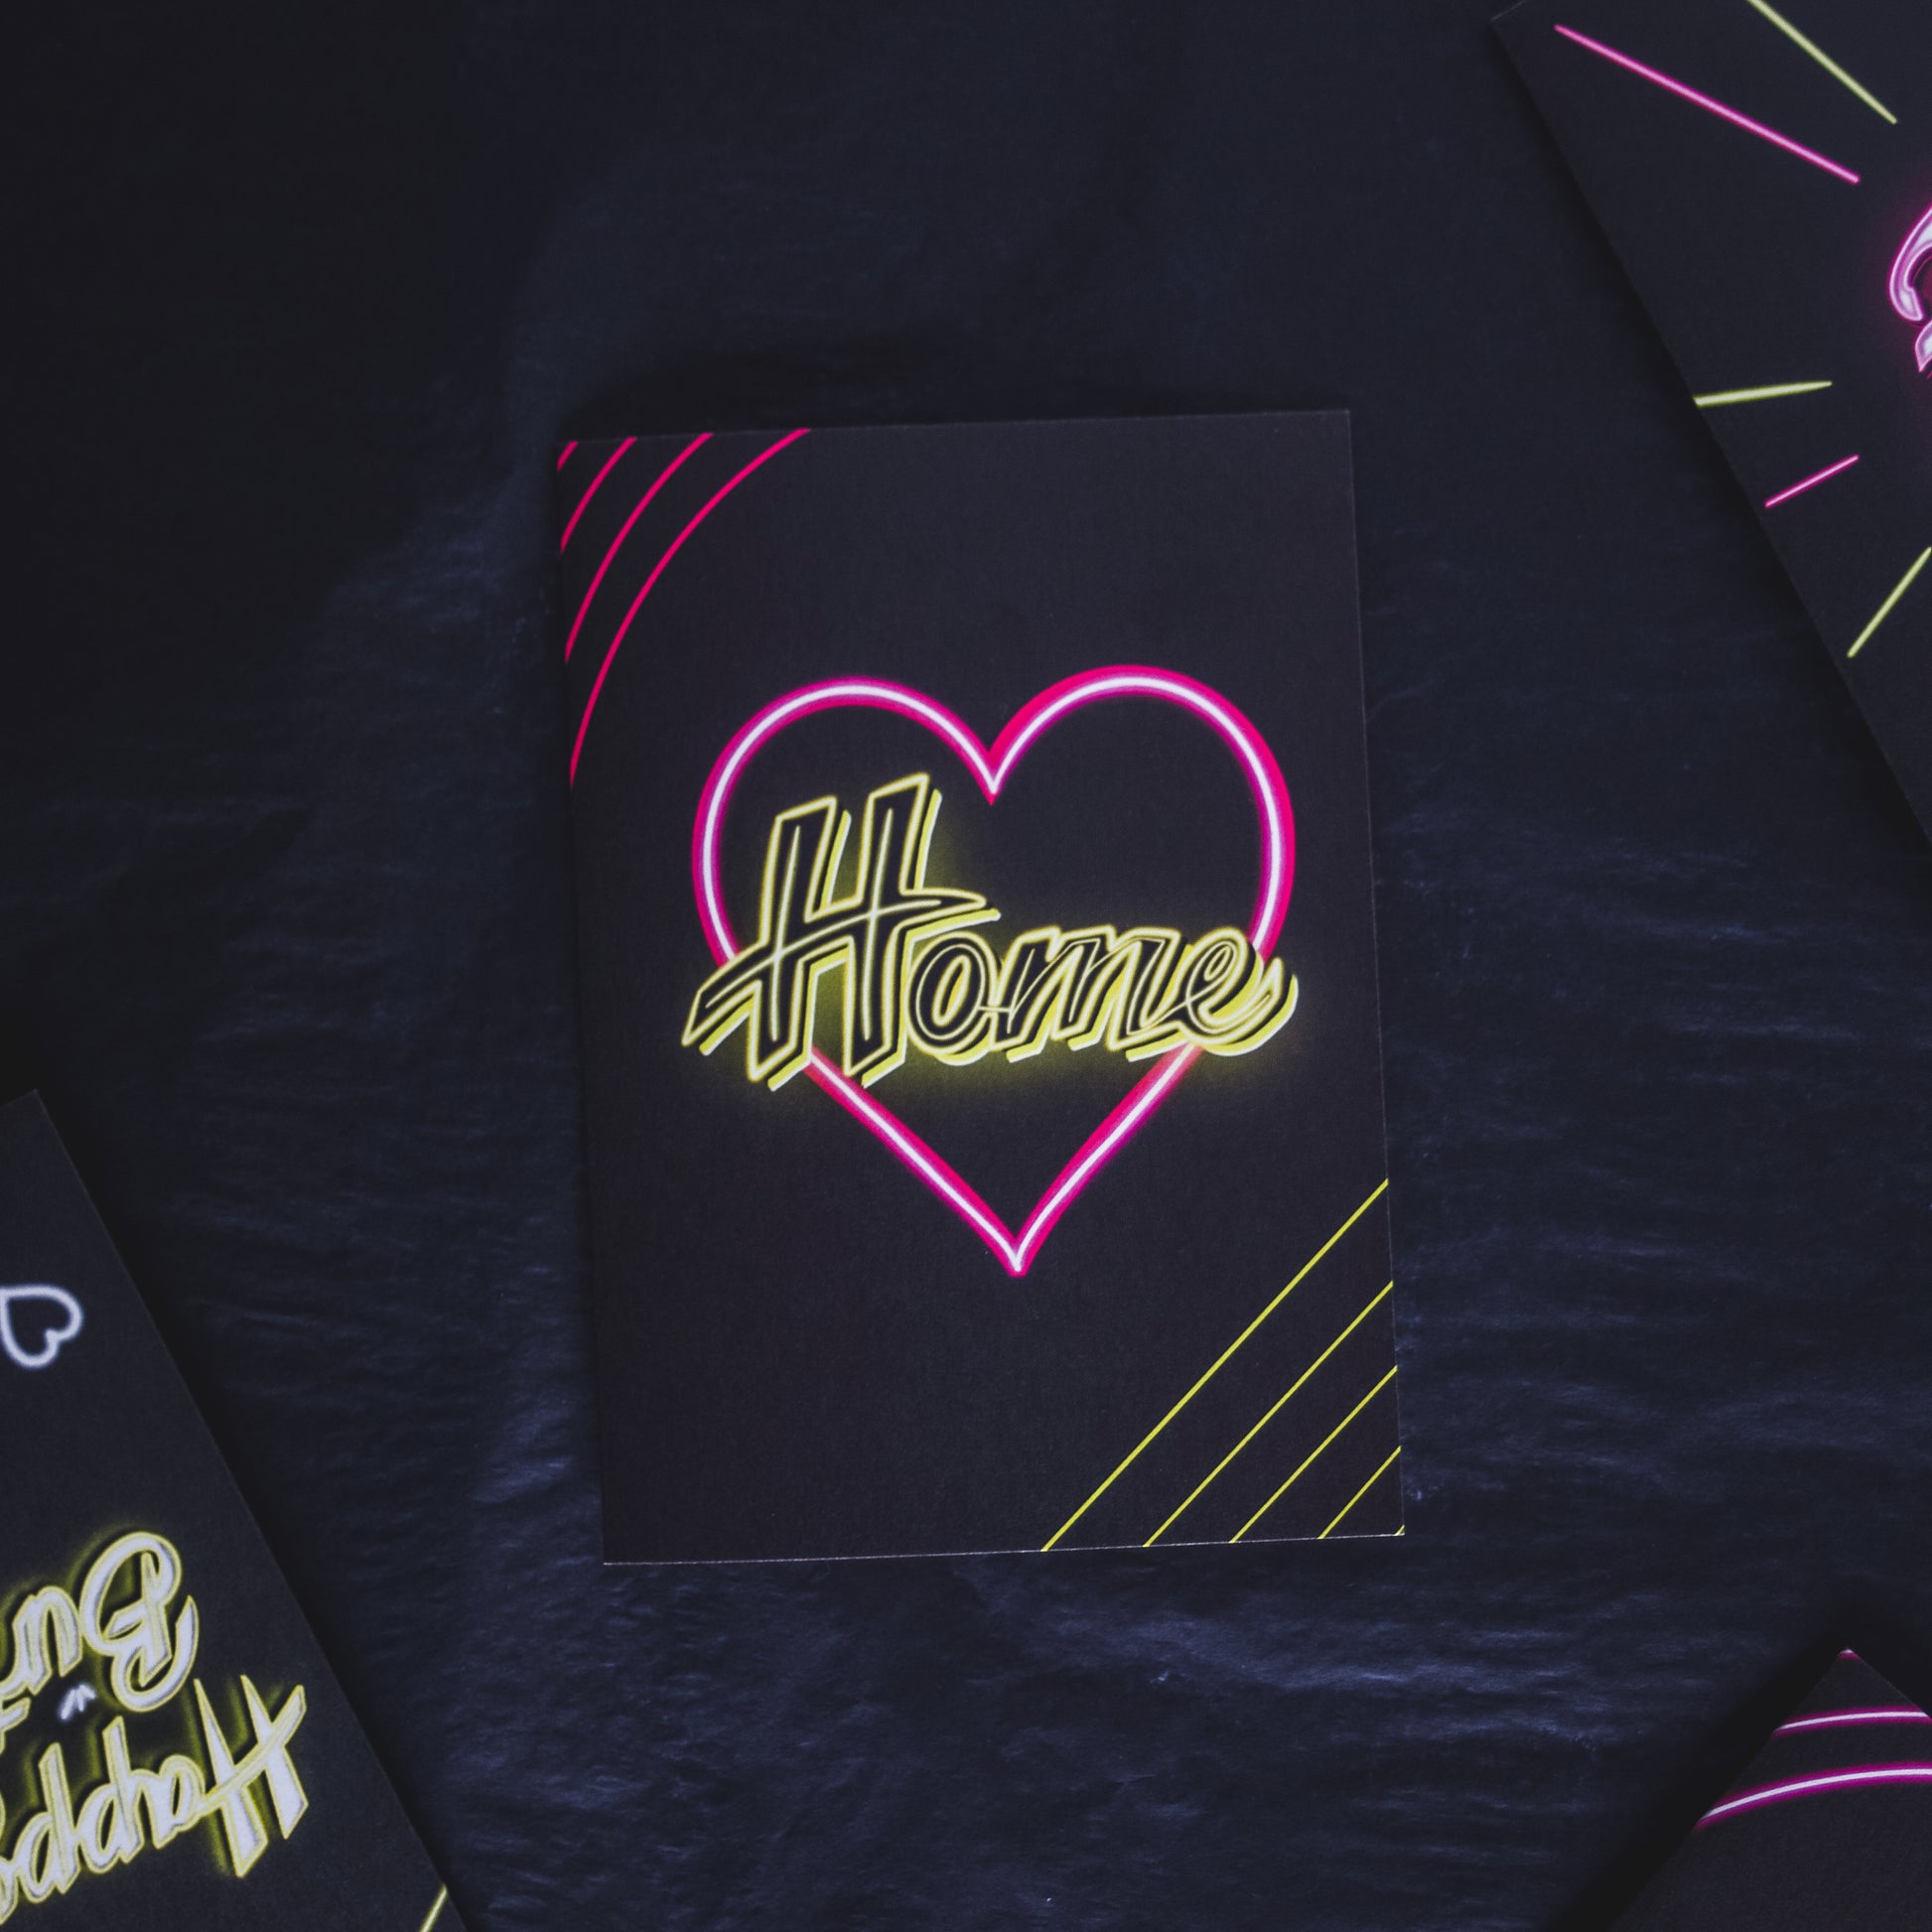 Black Greetings Card With Yellow Home Written in Pink Neon Heart by Wayward